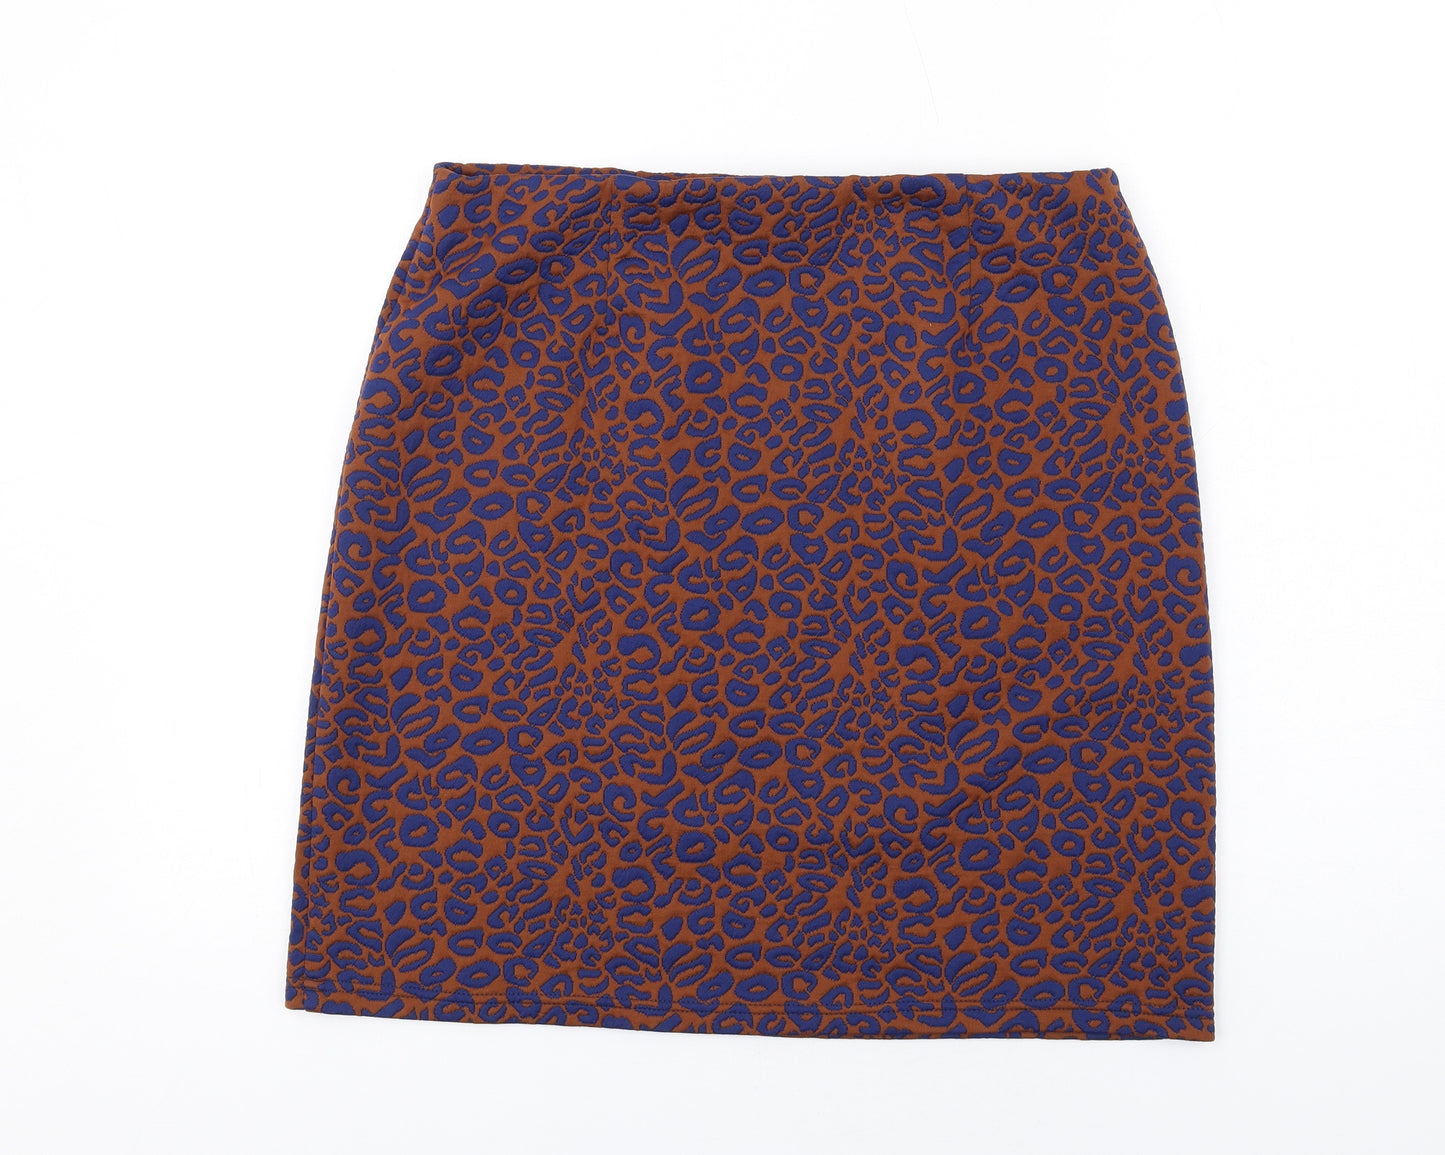 Marks and Spencer Womens Brown Animal Print Polyester A-Line Skirt Size 14 - Leopard pattern